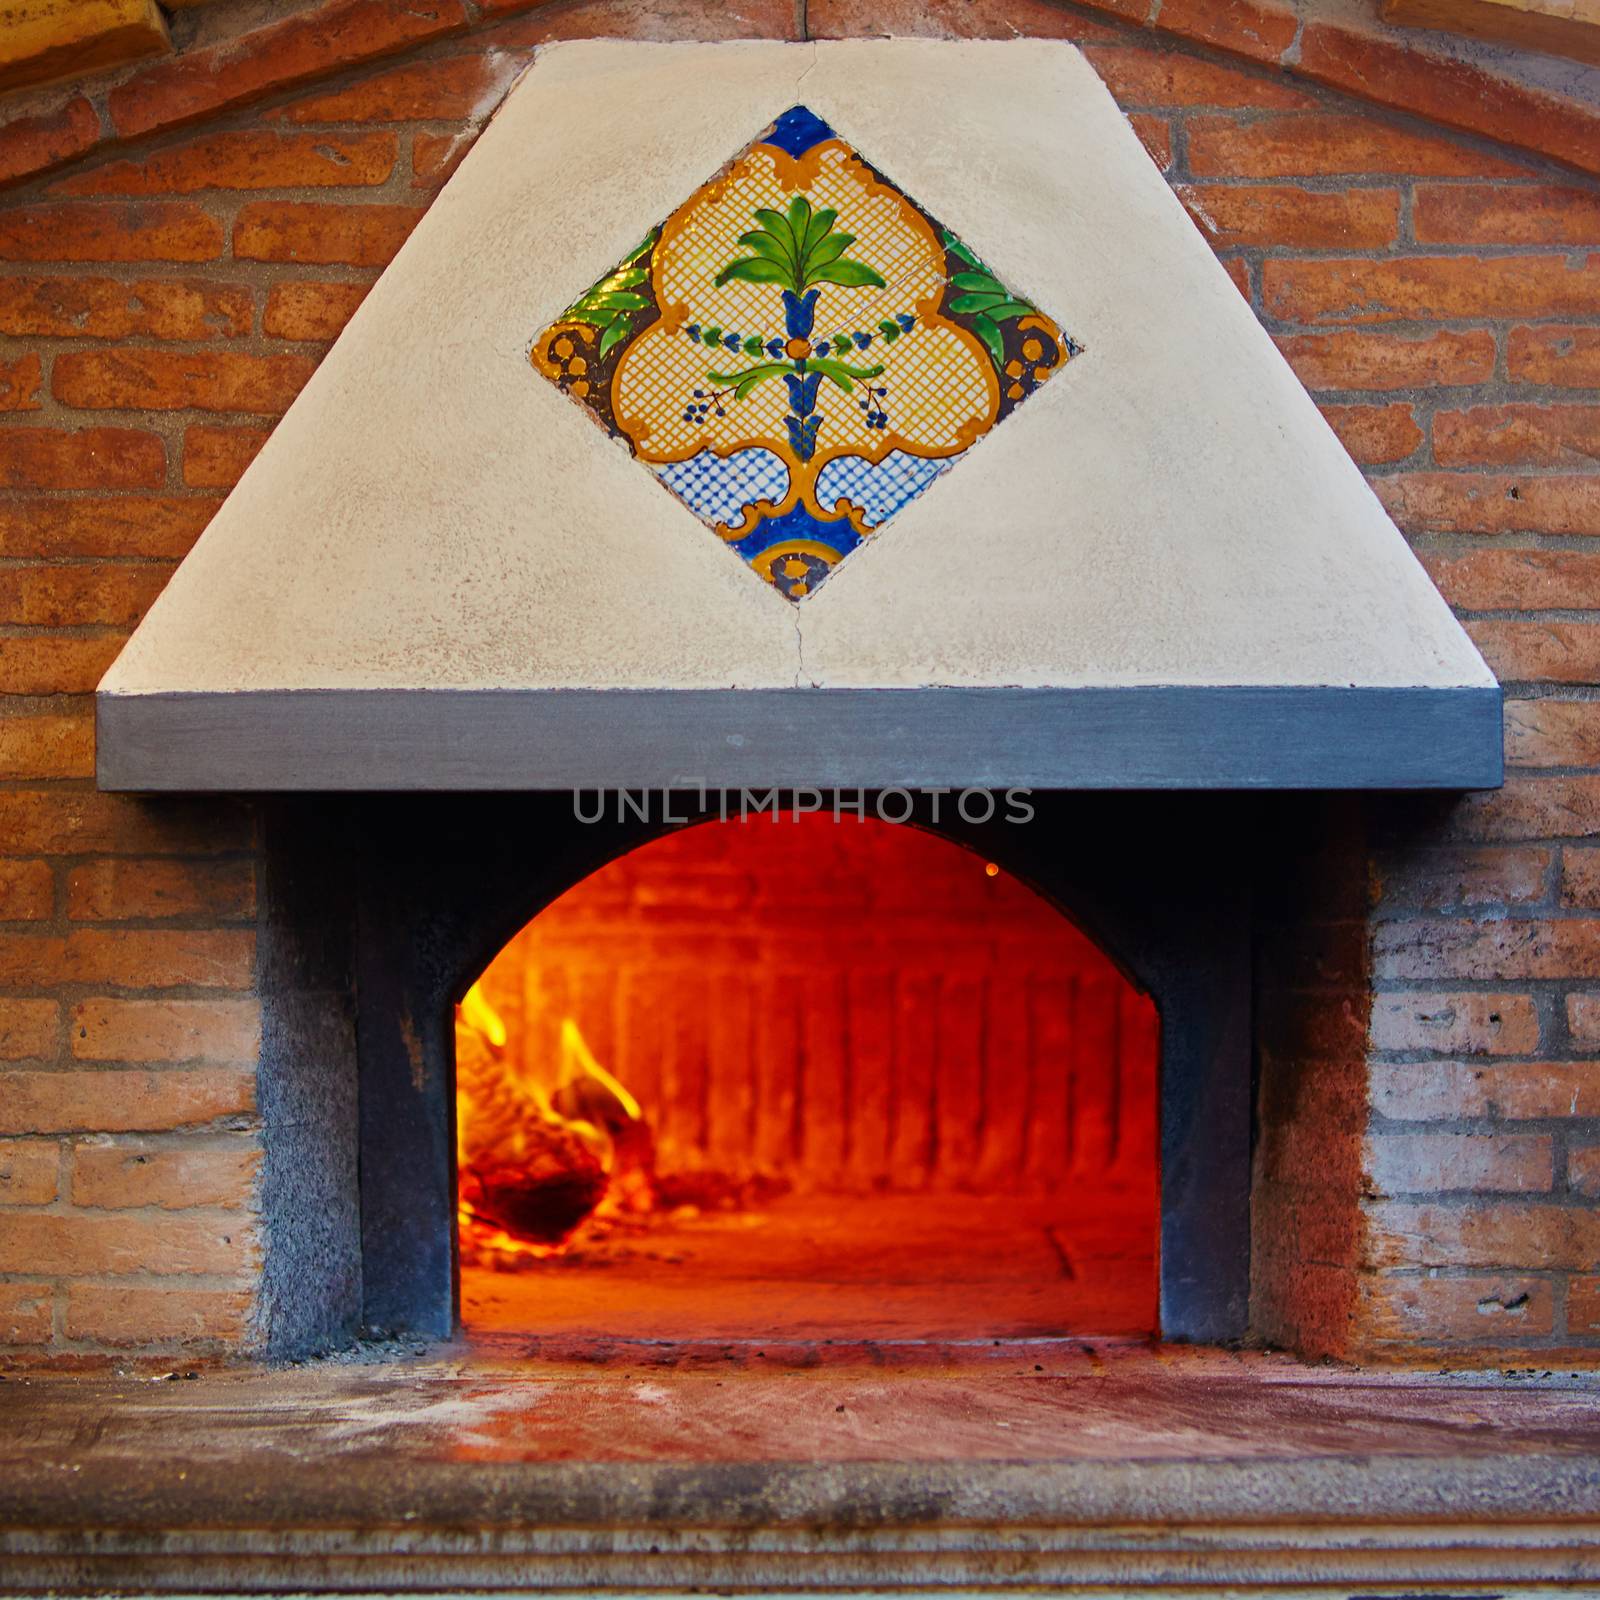 A traditional oven for cooking and baking pizza.